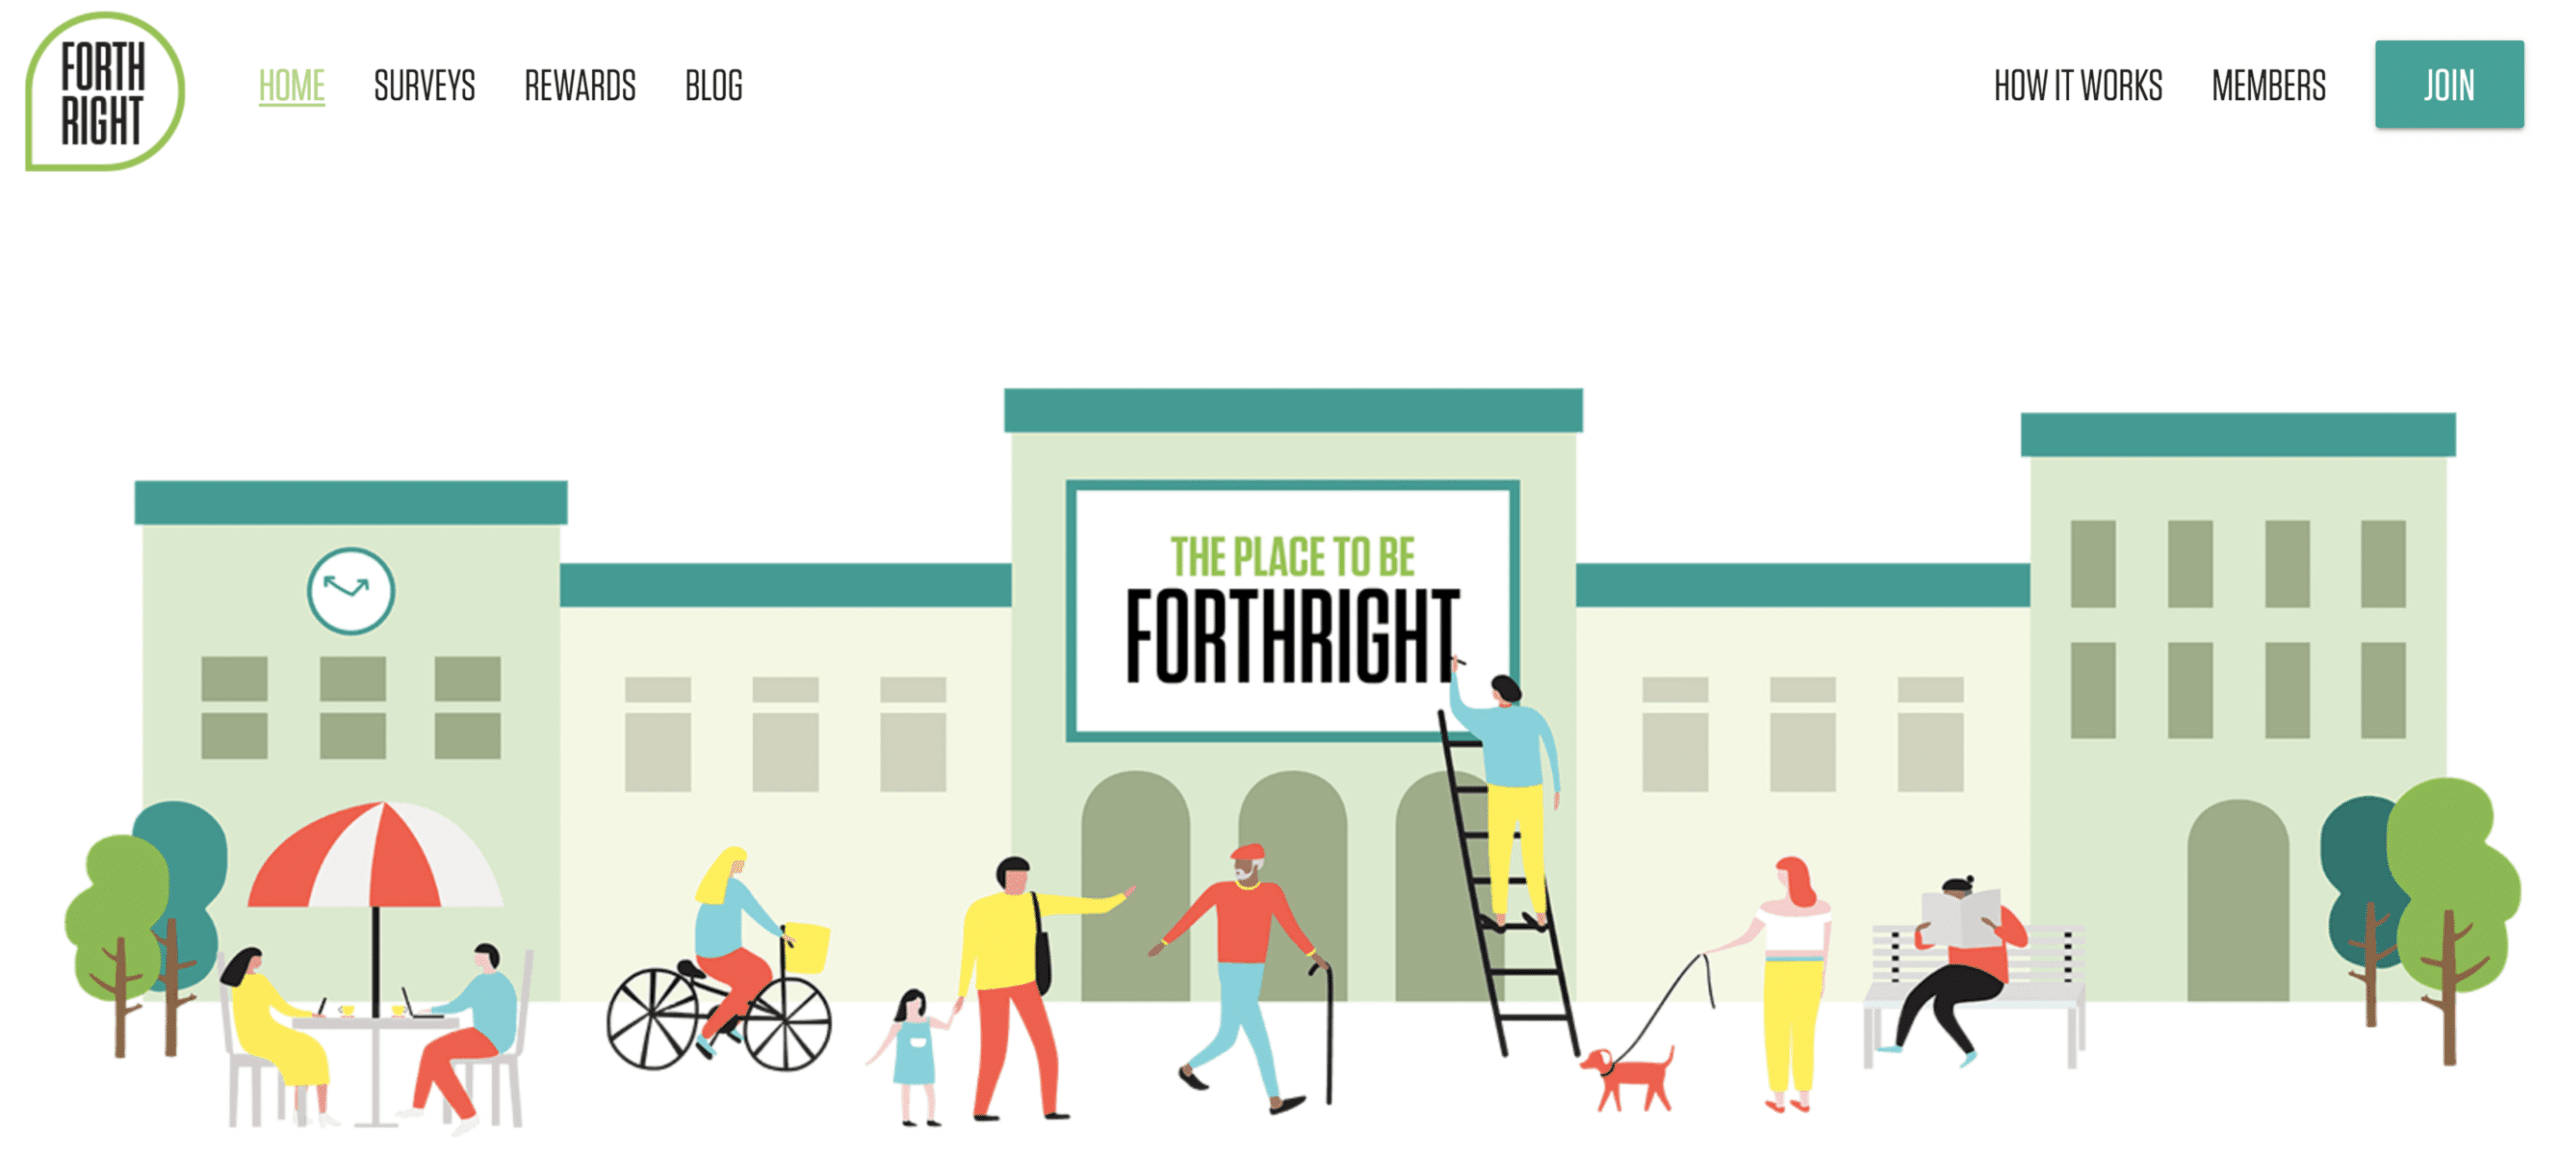 Forthright Surveys Review